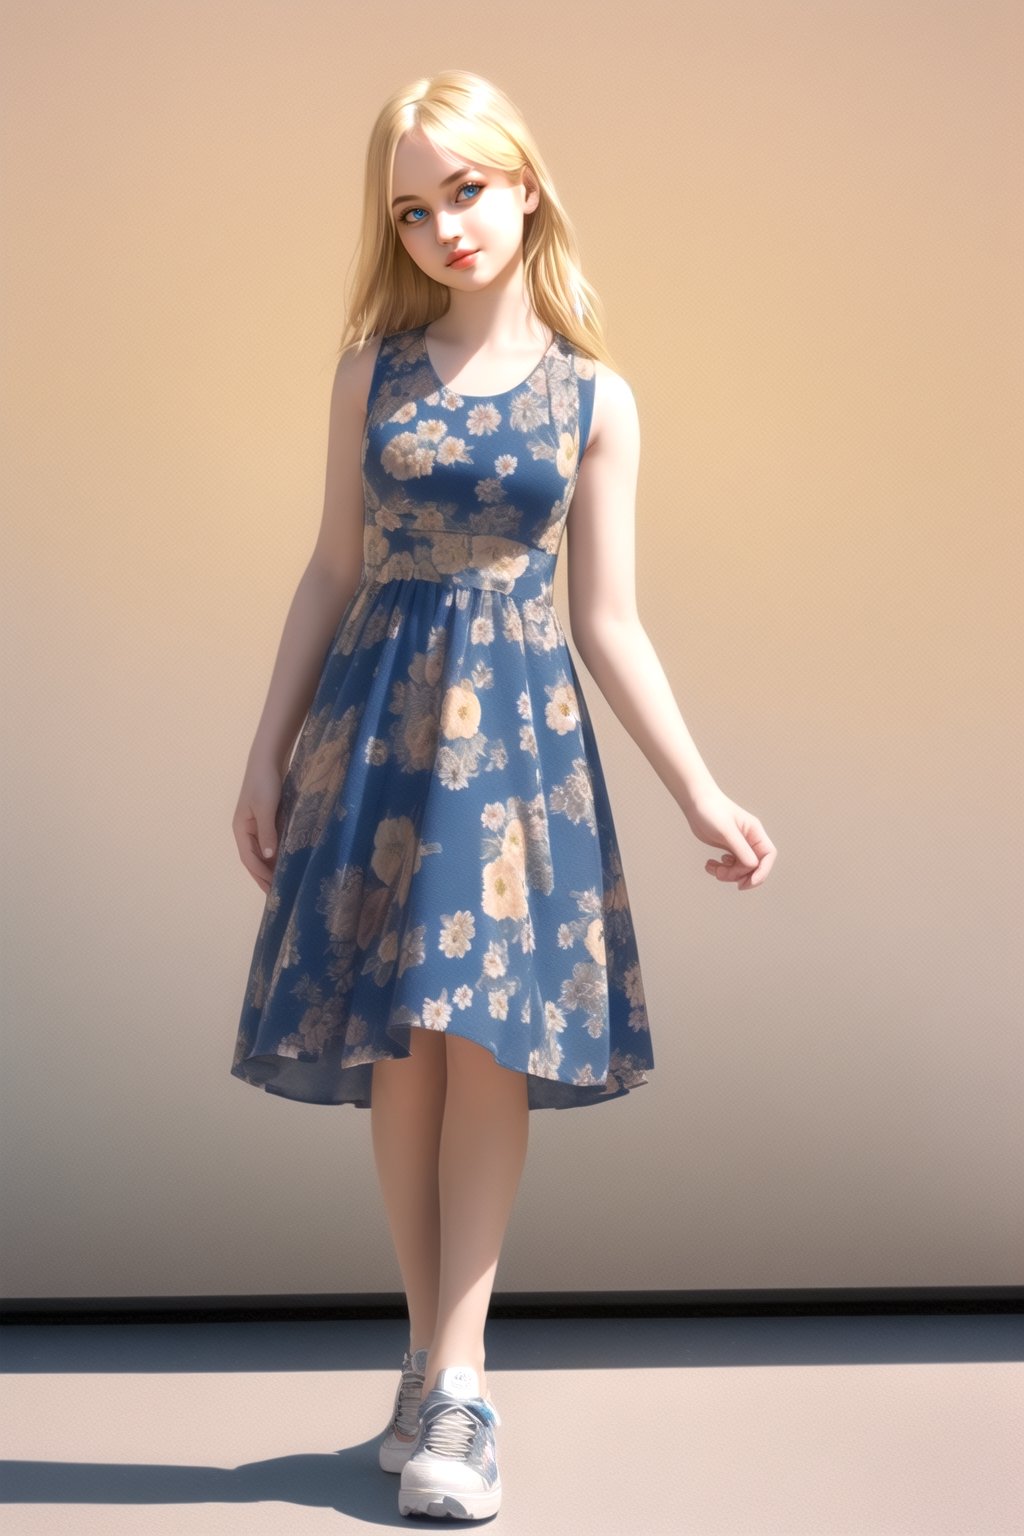 realistic Big blue eyes, she looks like Demi More, Golden blonde hair color
She wears a sleeveless, floral dress with sneakers and has a sly smile.
Please generate an image without any physical defects or abnormalities.
try the 'California highlights' technique on her hair, she is standing 
Please detail her face well

